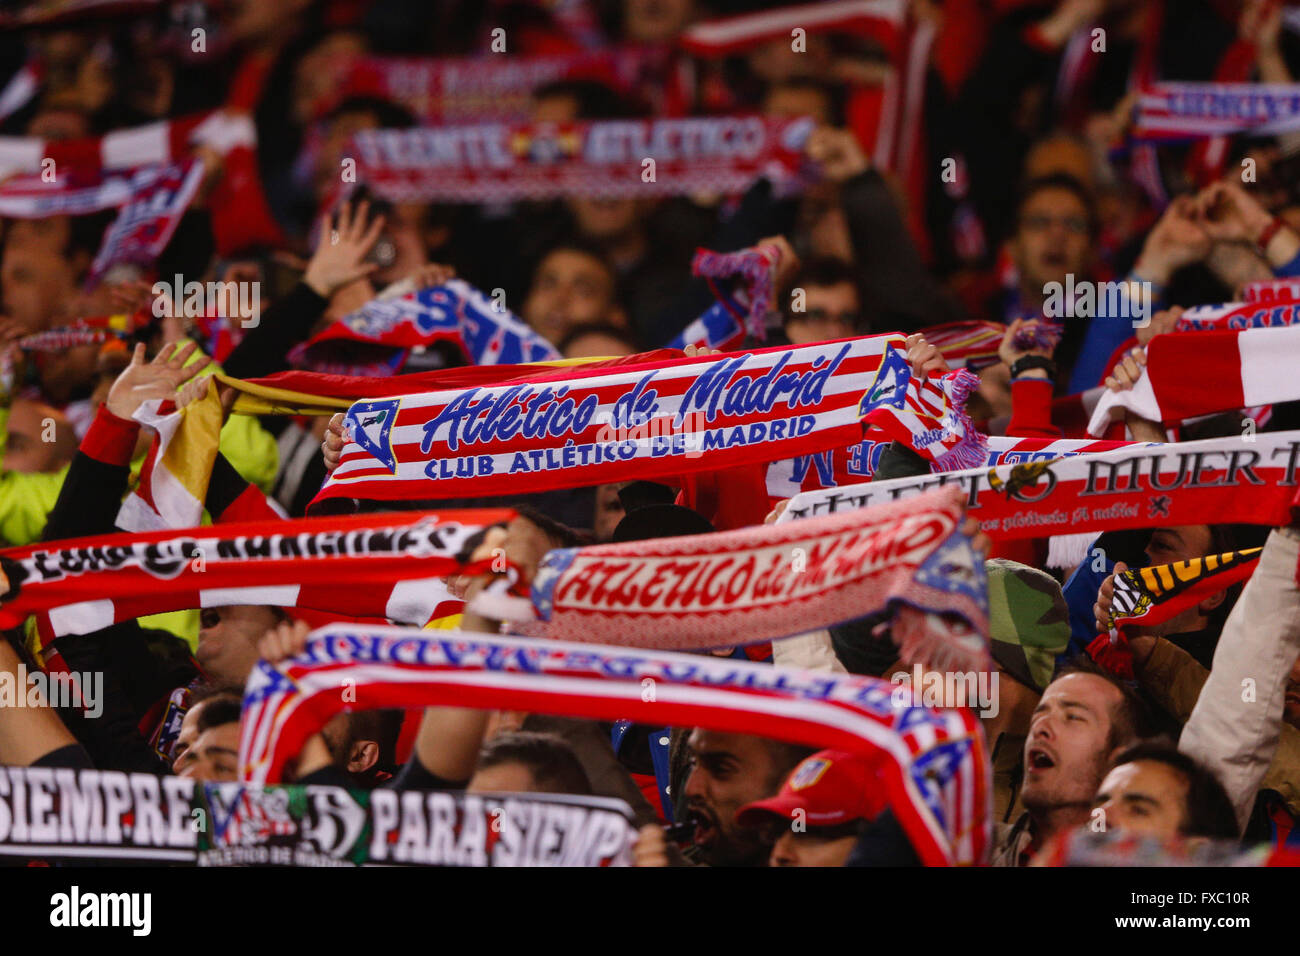 Madrid, Spain. 13th Apr, 2016. At. Madrid fans. UCL Champions League between Atletico de Madrid and FC Barcelona at the Vicente Calderon stadium in Madrid, Spain, April 13, 2016 . © Action Plus Sports/Alamy Live News Stock Photo